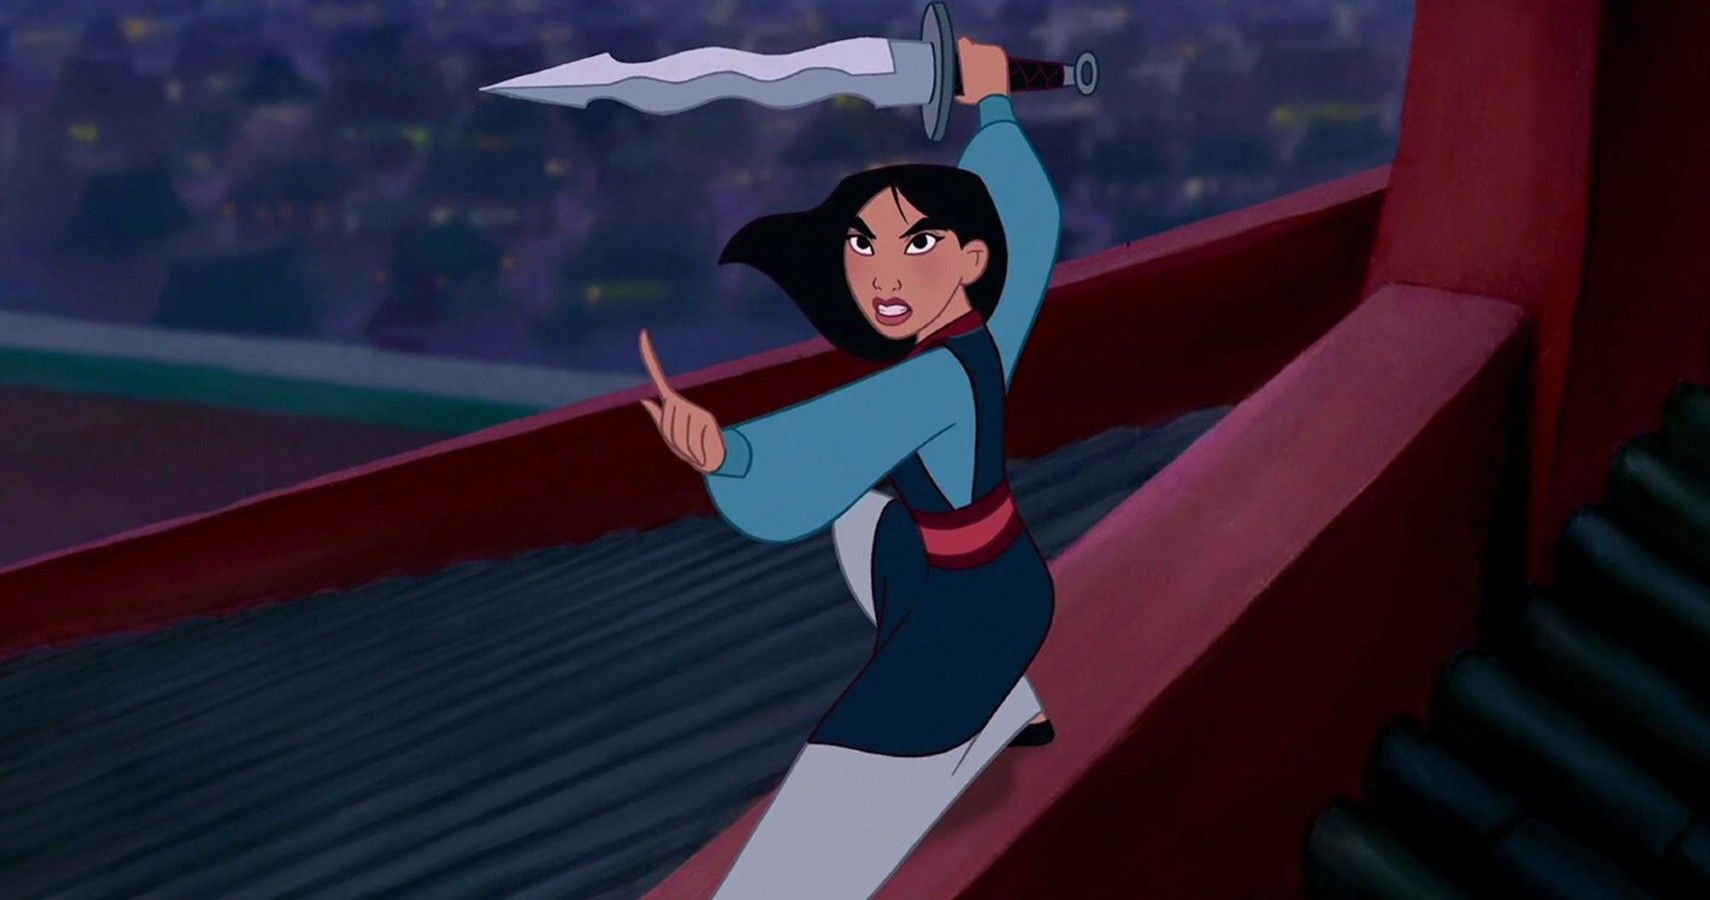 Disney: The 10 Best Action Scenes In Their Animated Movies